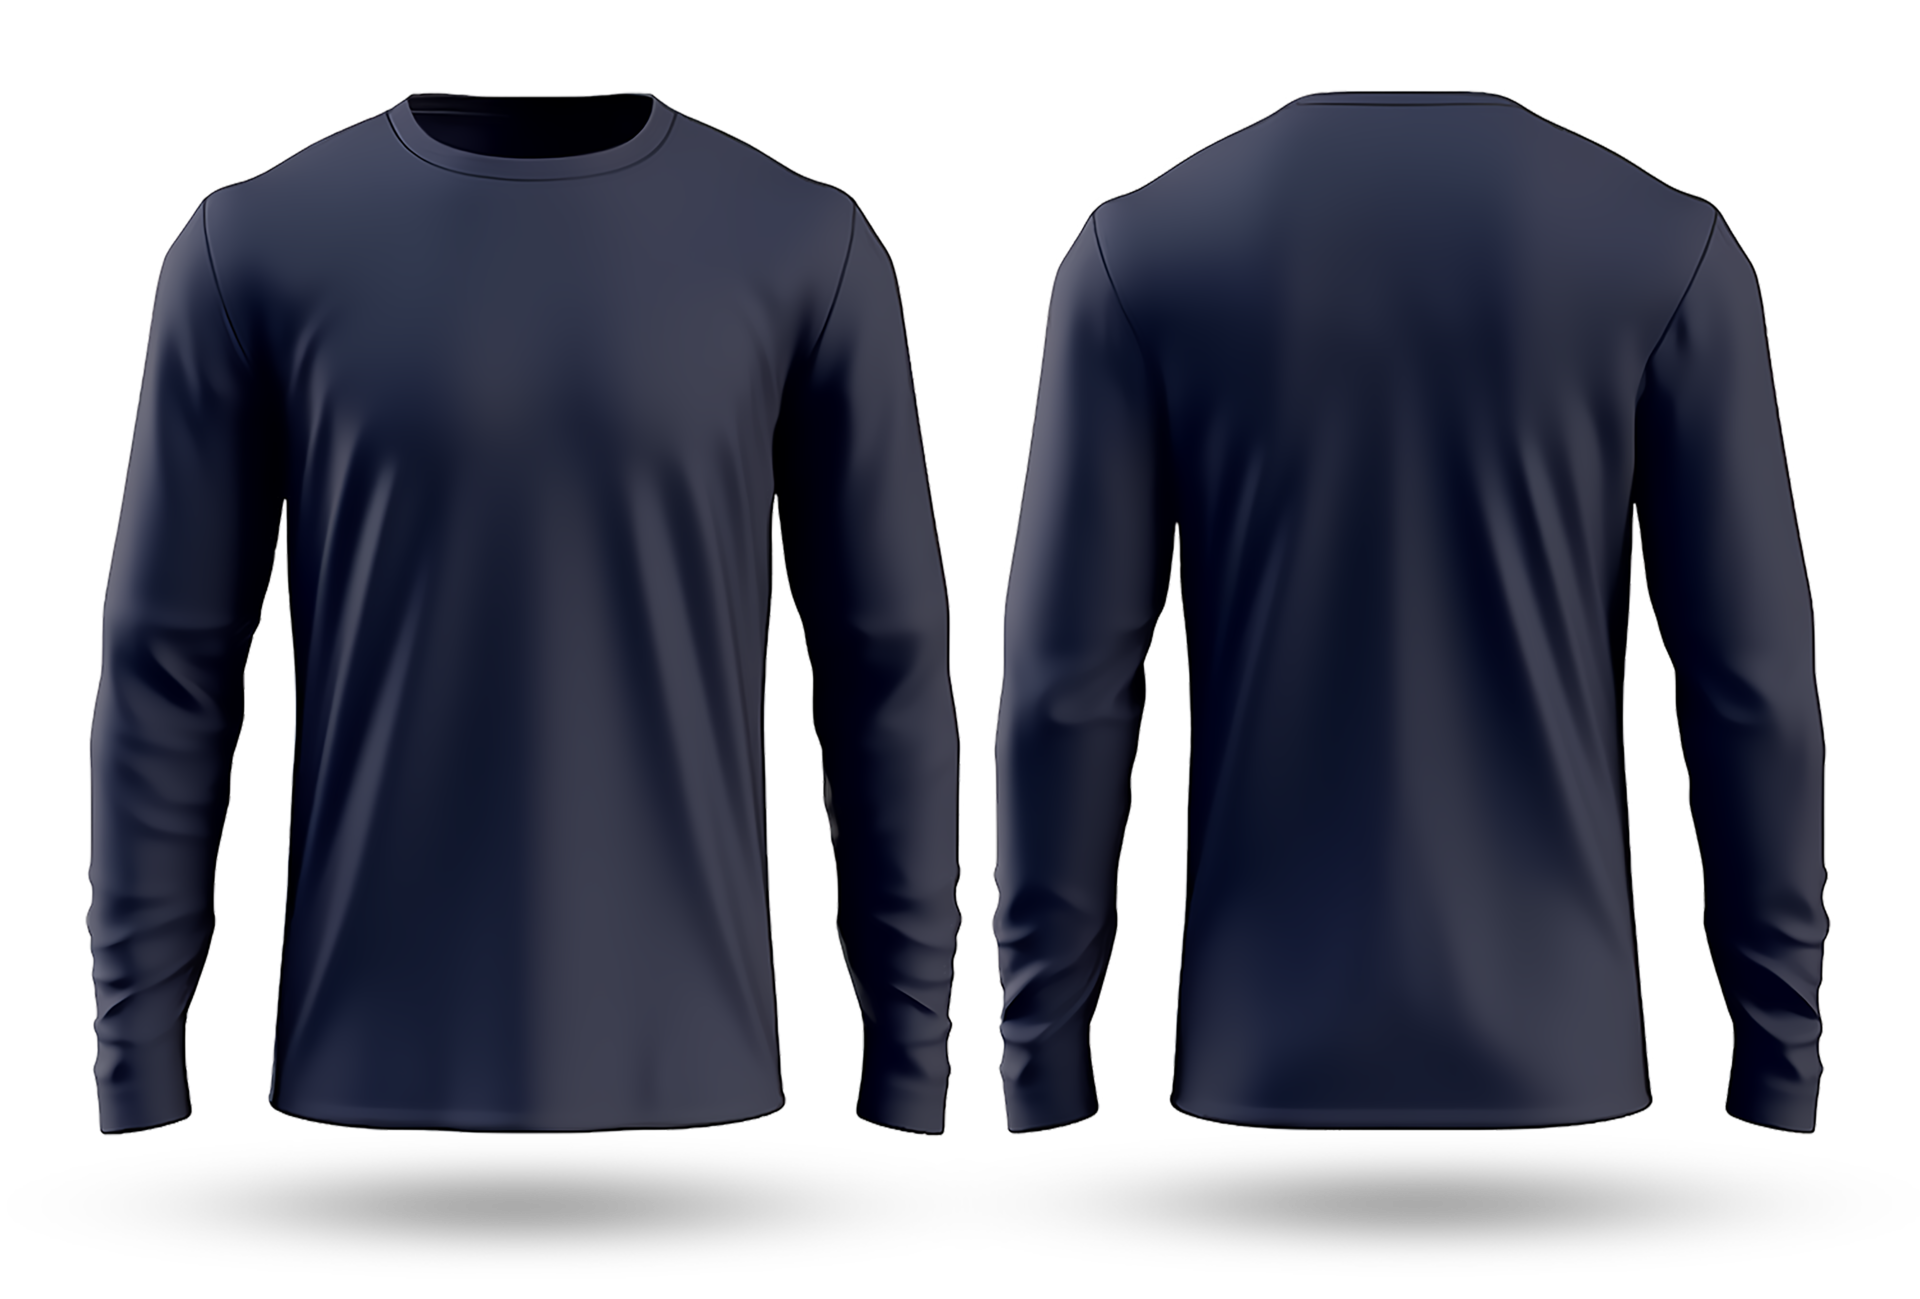 Navy long sleeve t-shirt mockup, with front and back views, isolated on ...